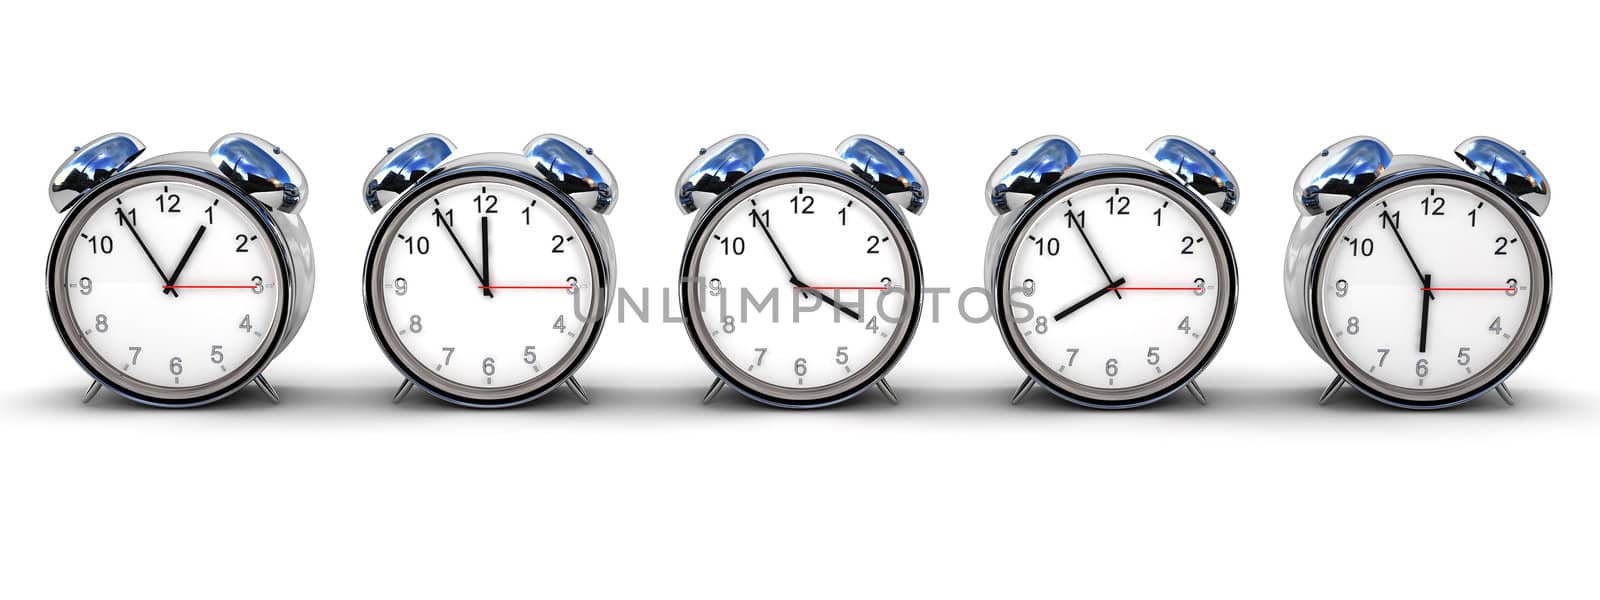 Five retro alarm clocks isolated over white, each with different time